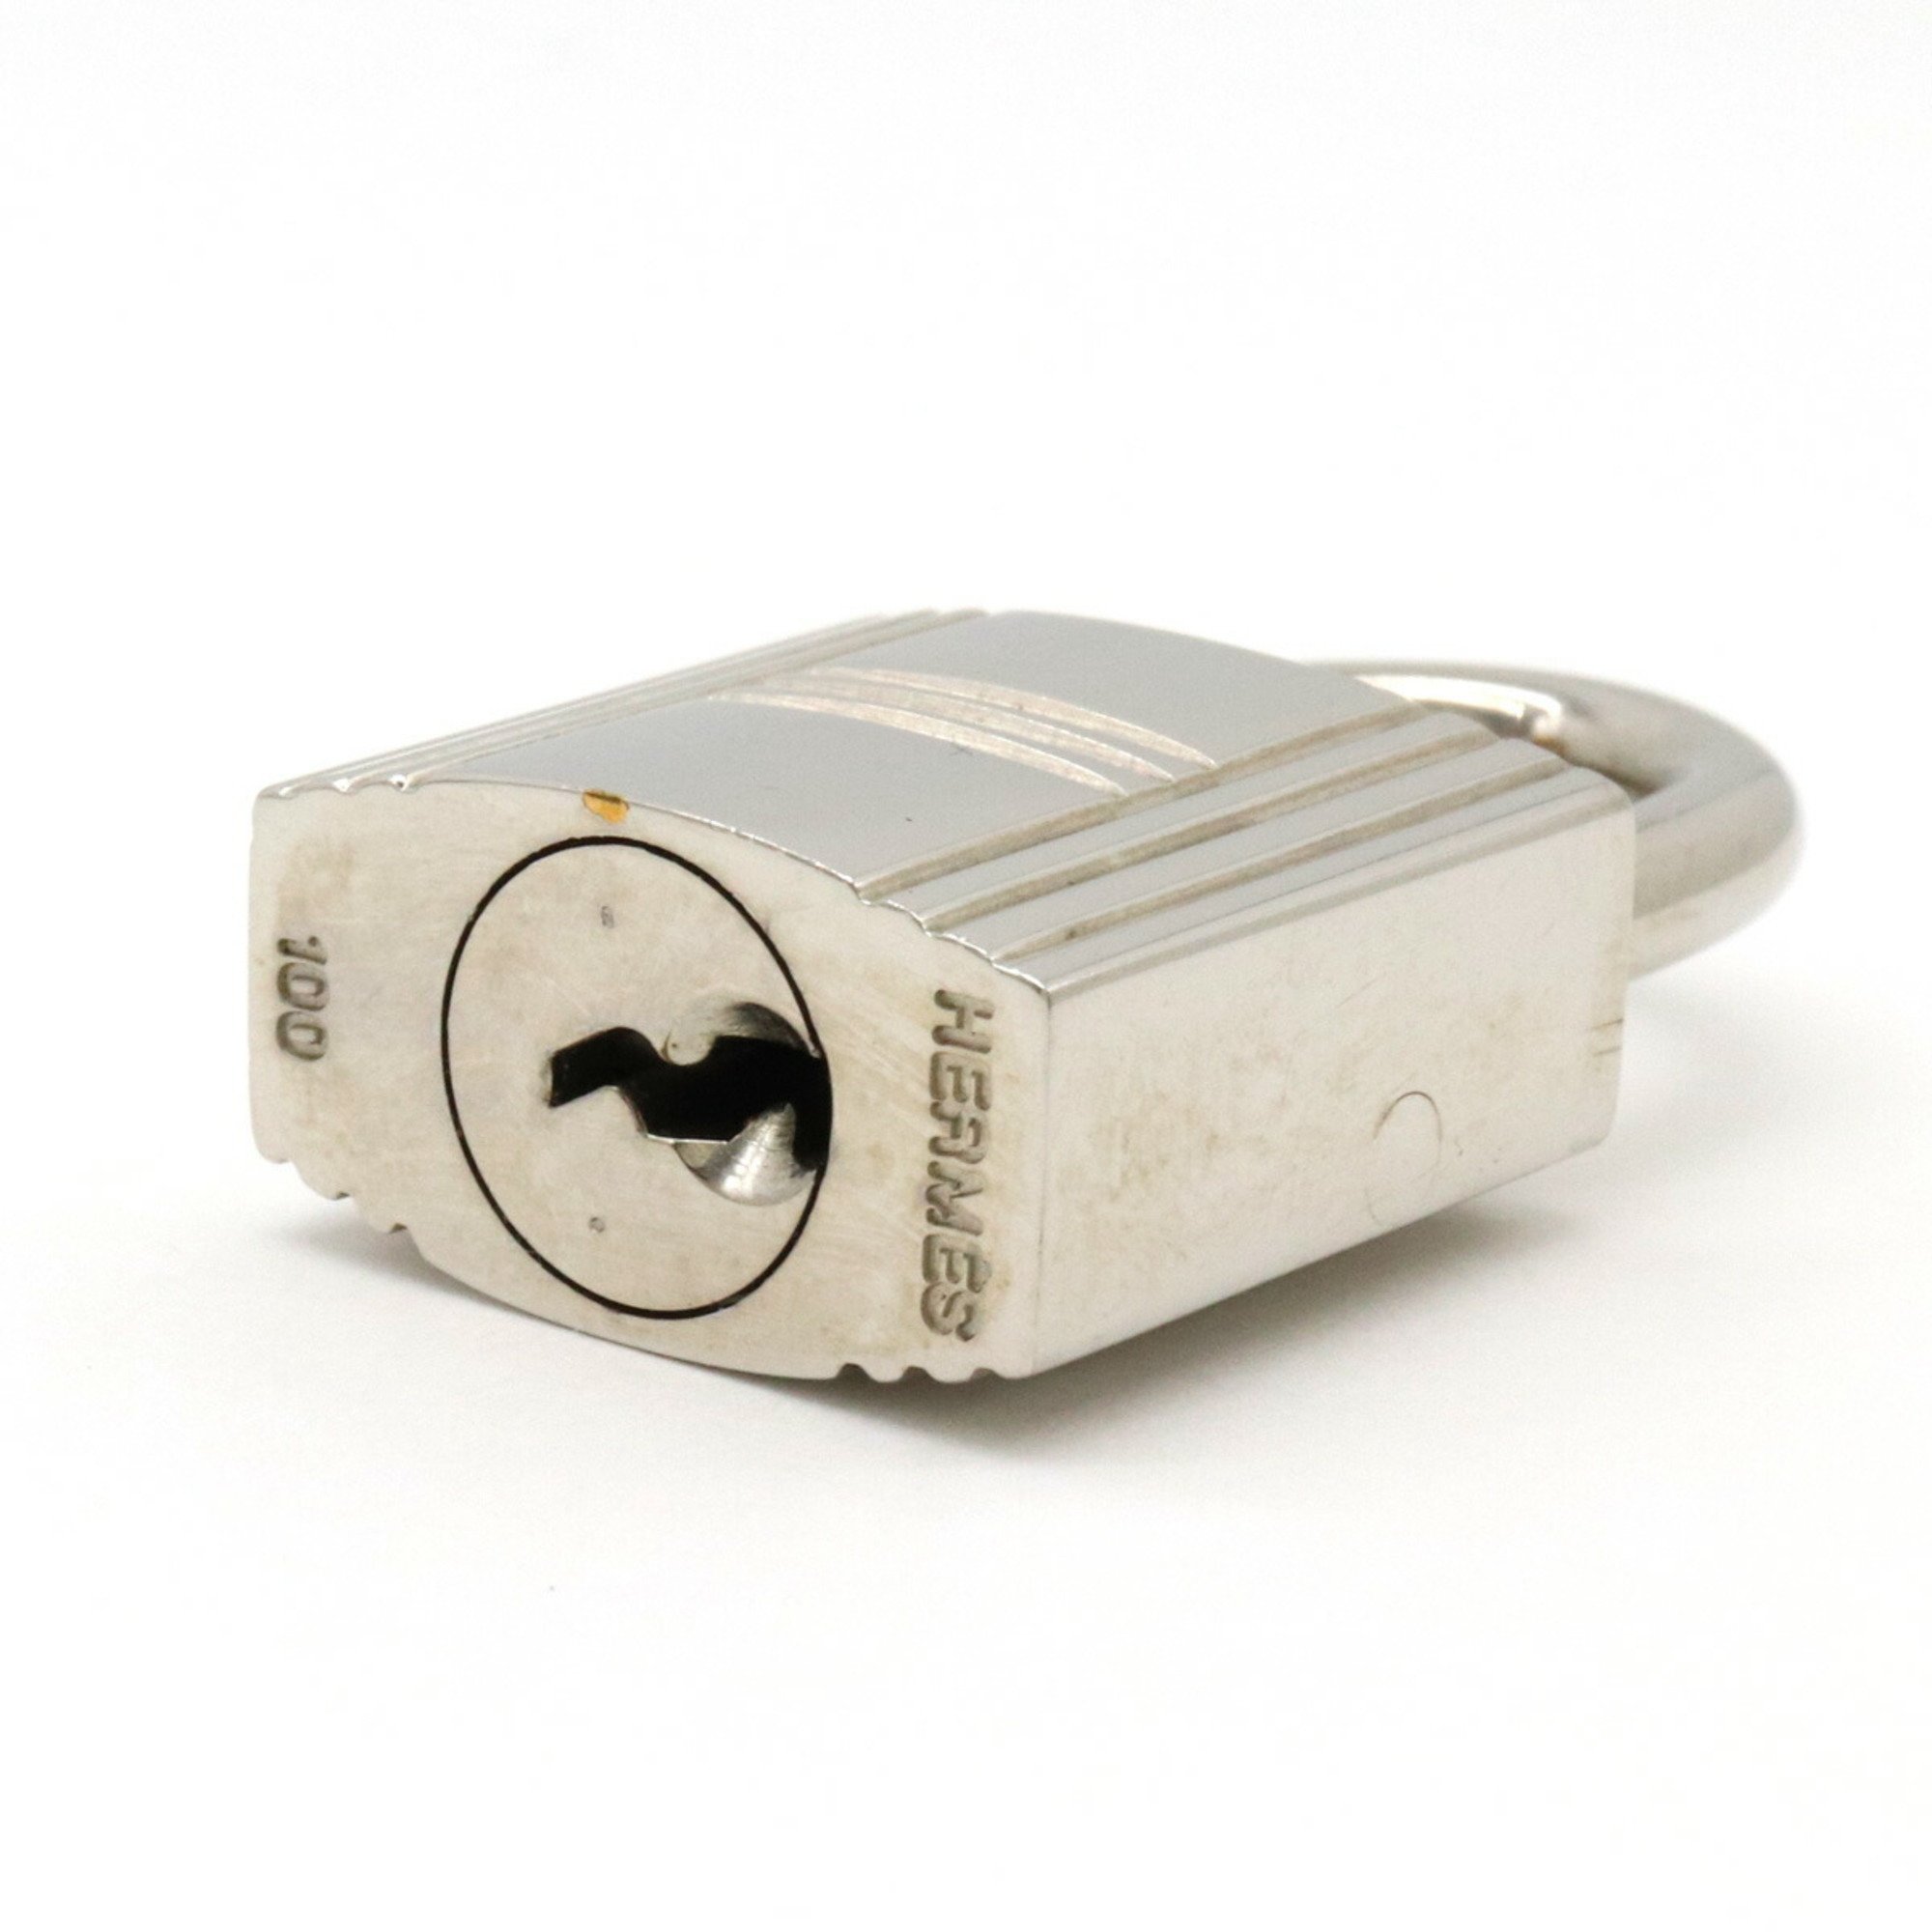 HERMES Padlock No. 100 with Key Silver Color